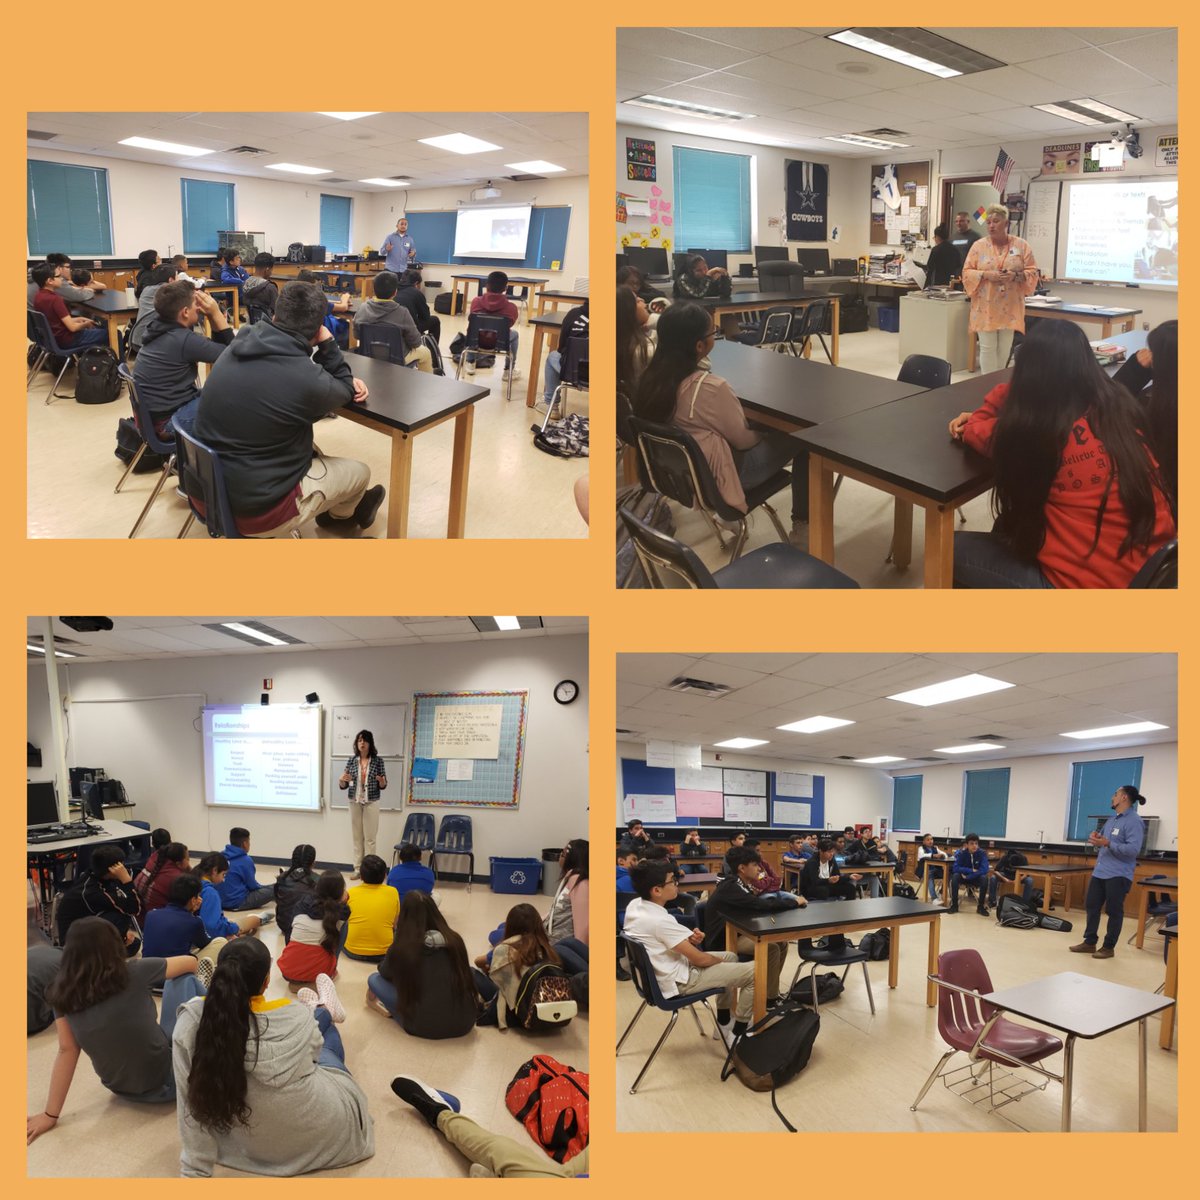 Thank you Center Against Family Violence presenters for informing our 6th, 7th & 8th grade students about healthy relationships and ways to prevent dating violence. #HawkPrideSISD #TeamSISD #SISDcounseling